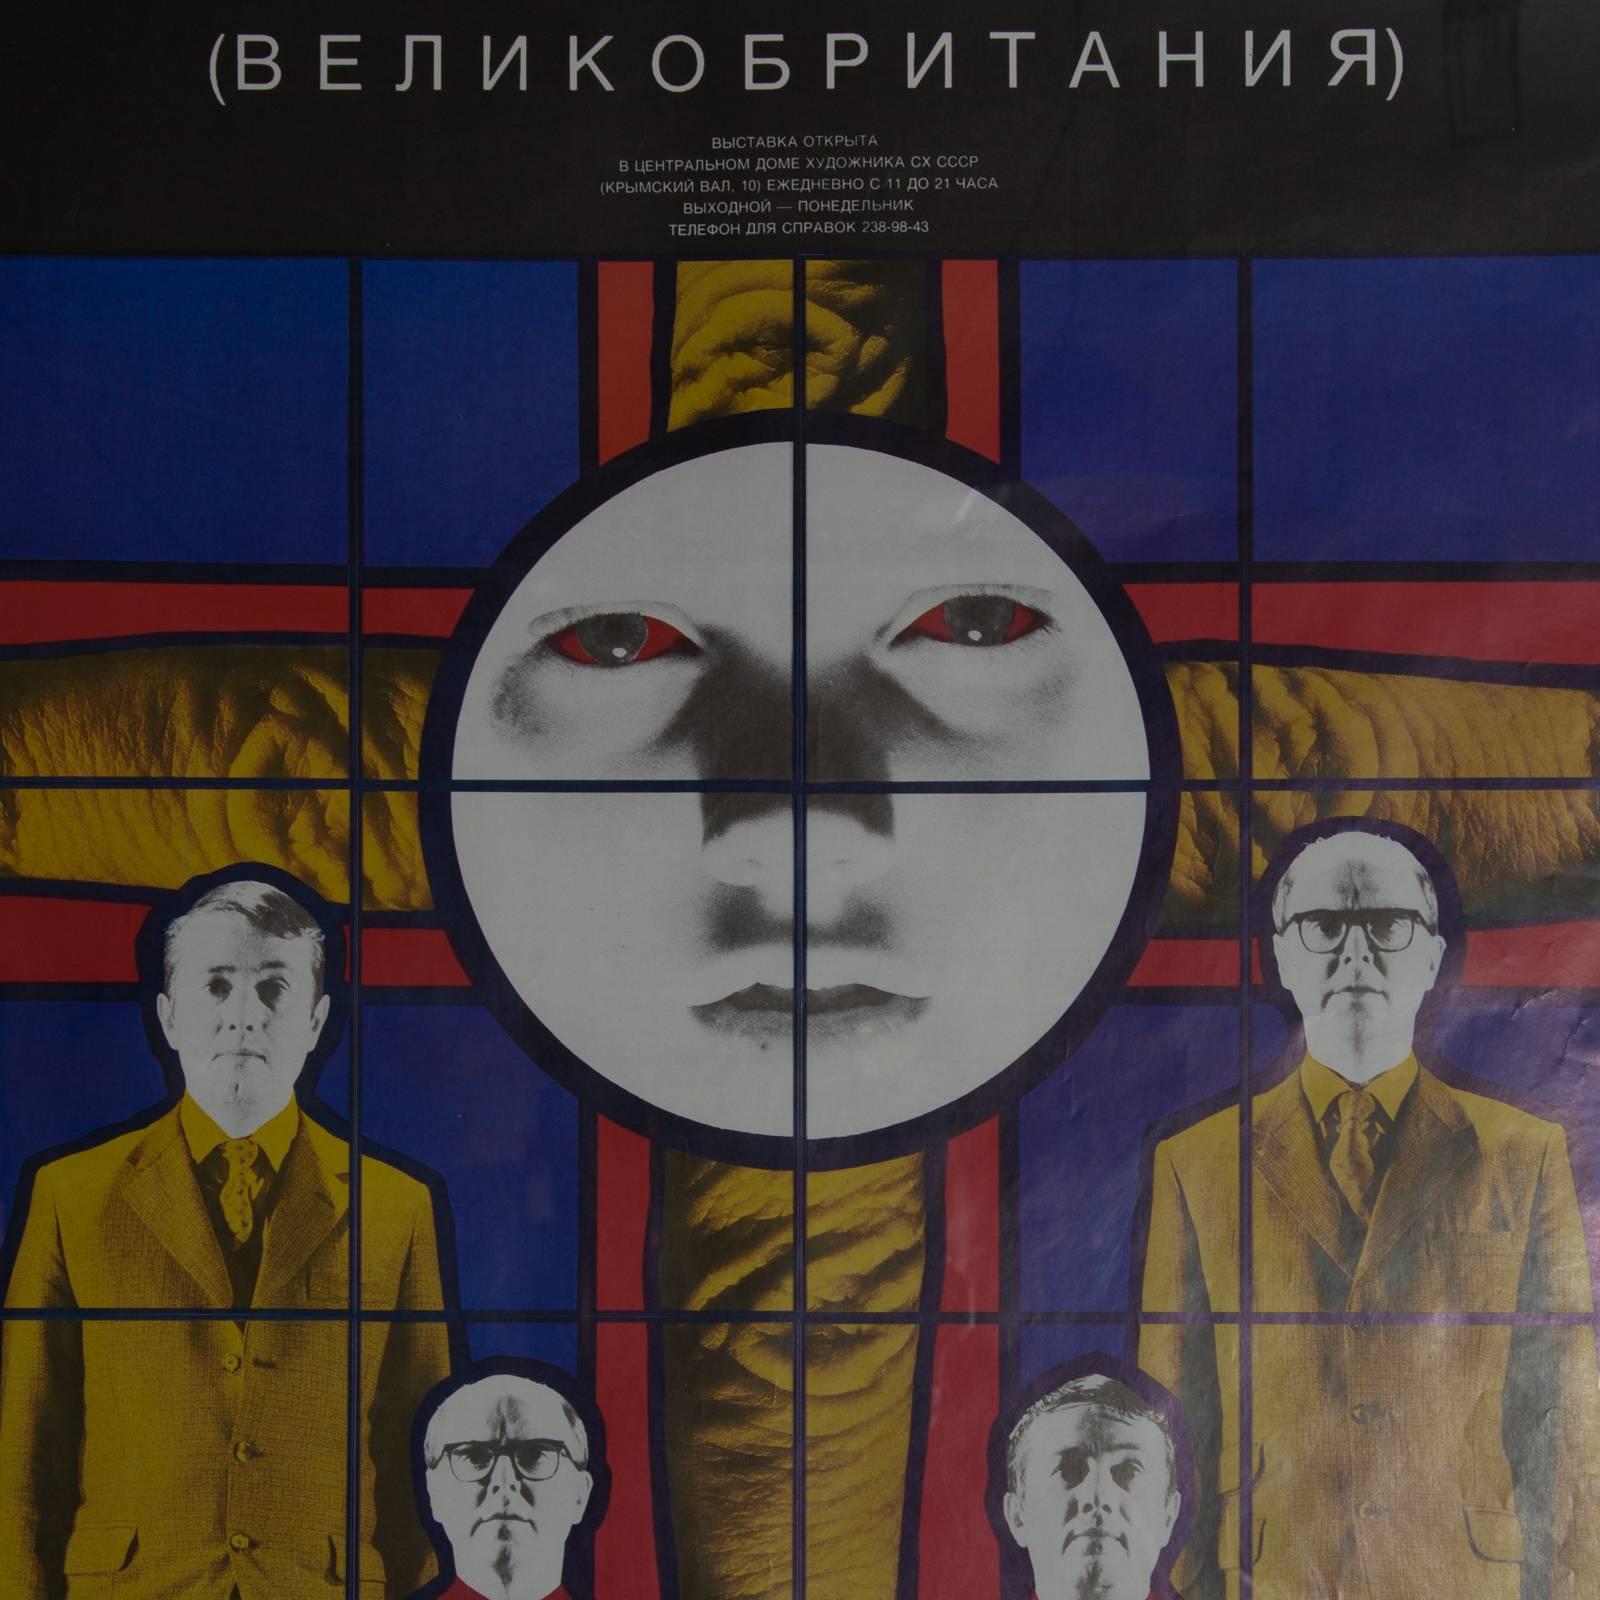 A modern Gilbert and George exhibition poster from an exhibit shown in Russia.